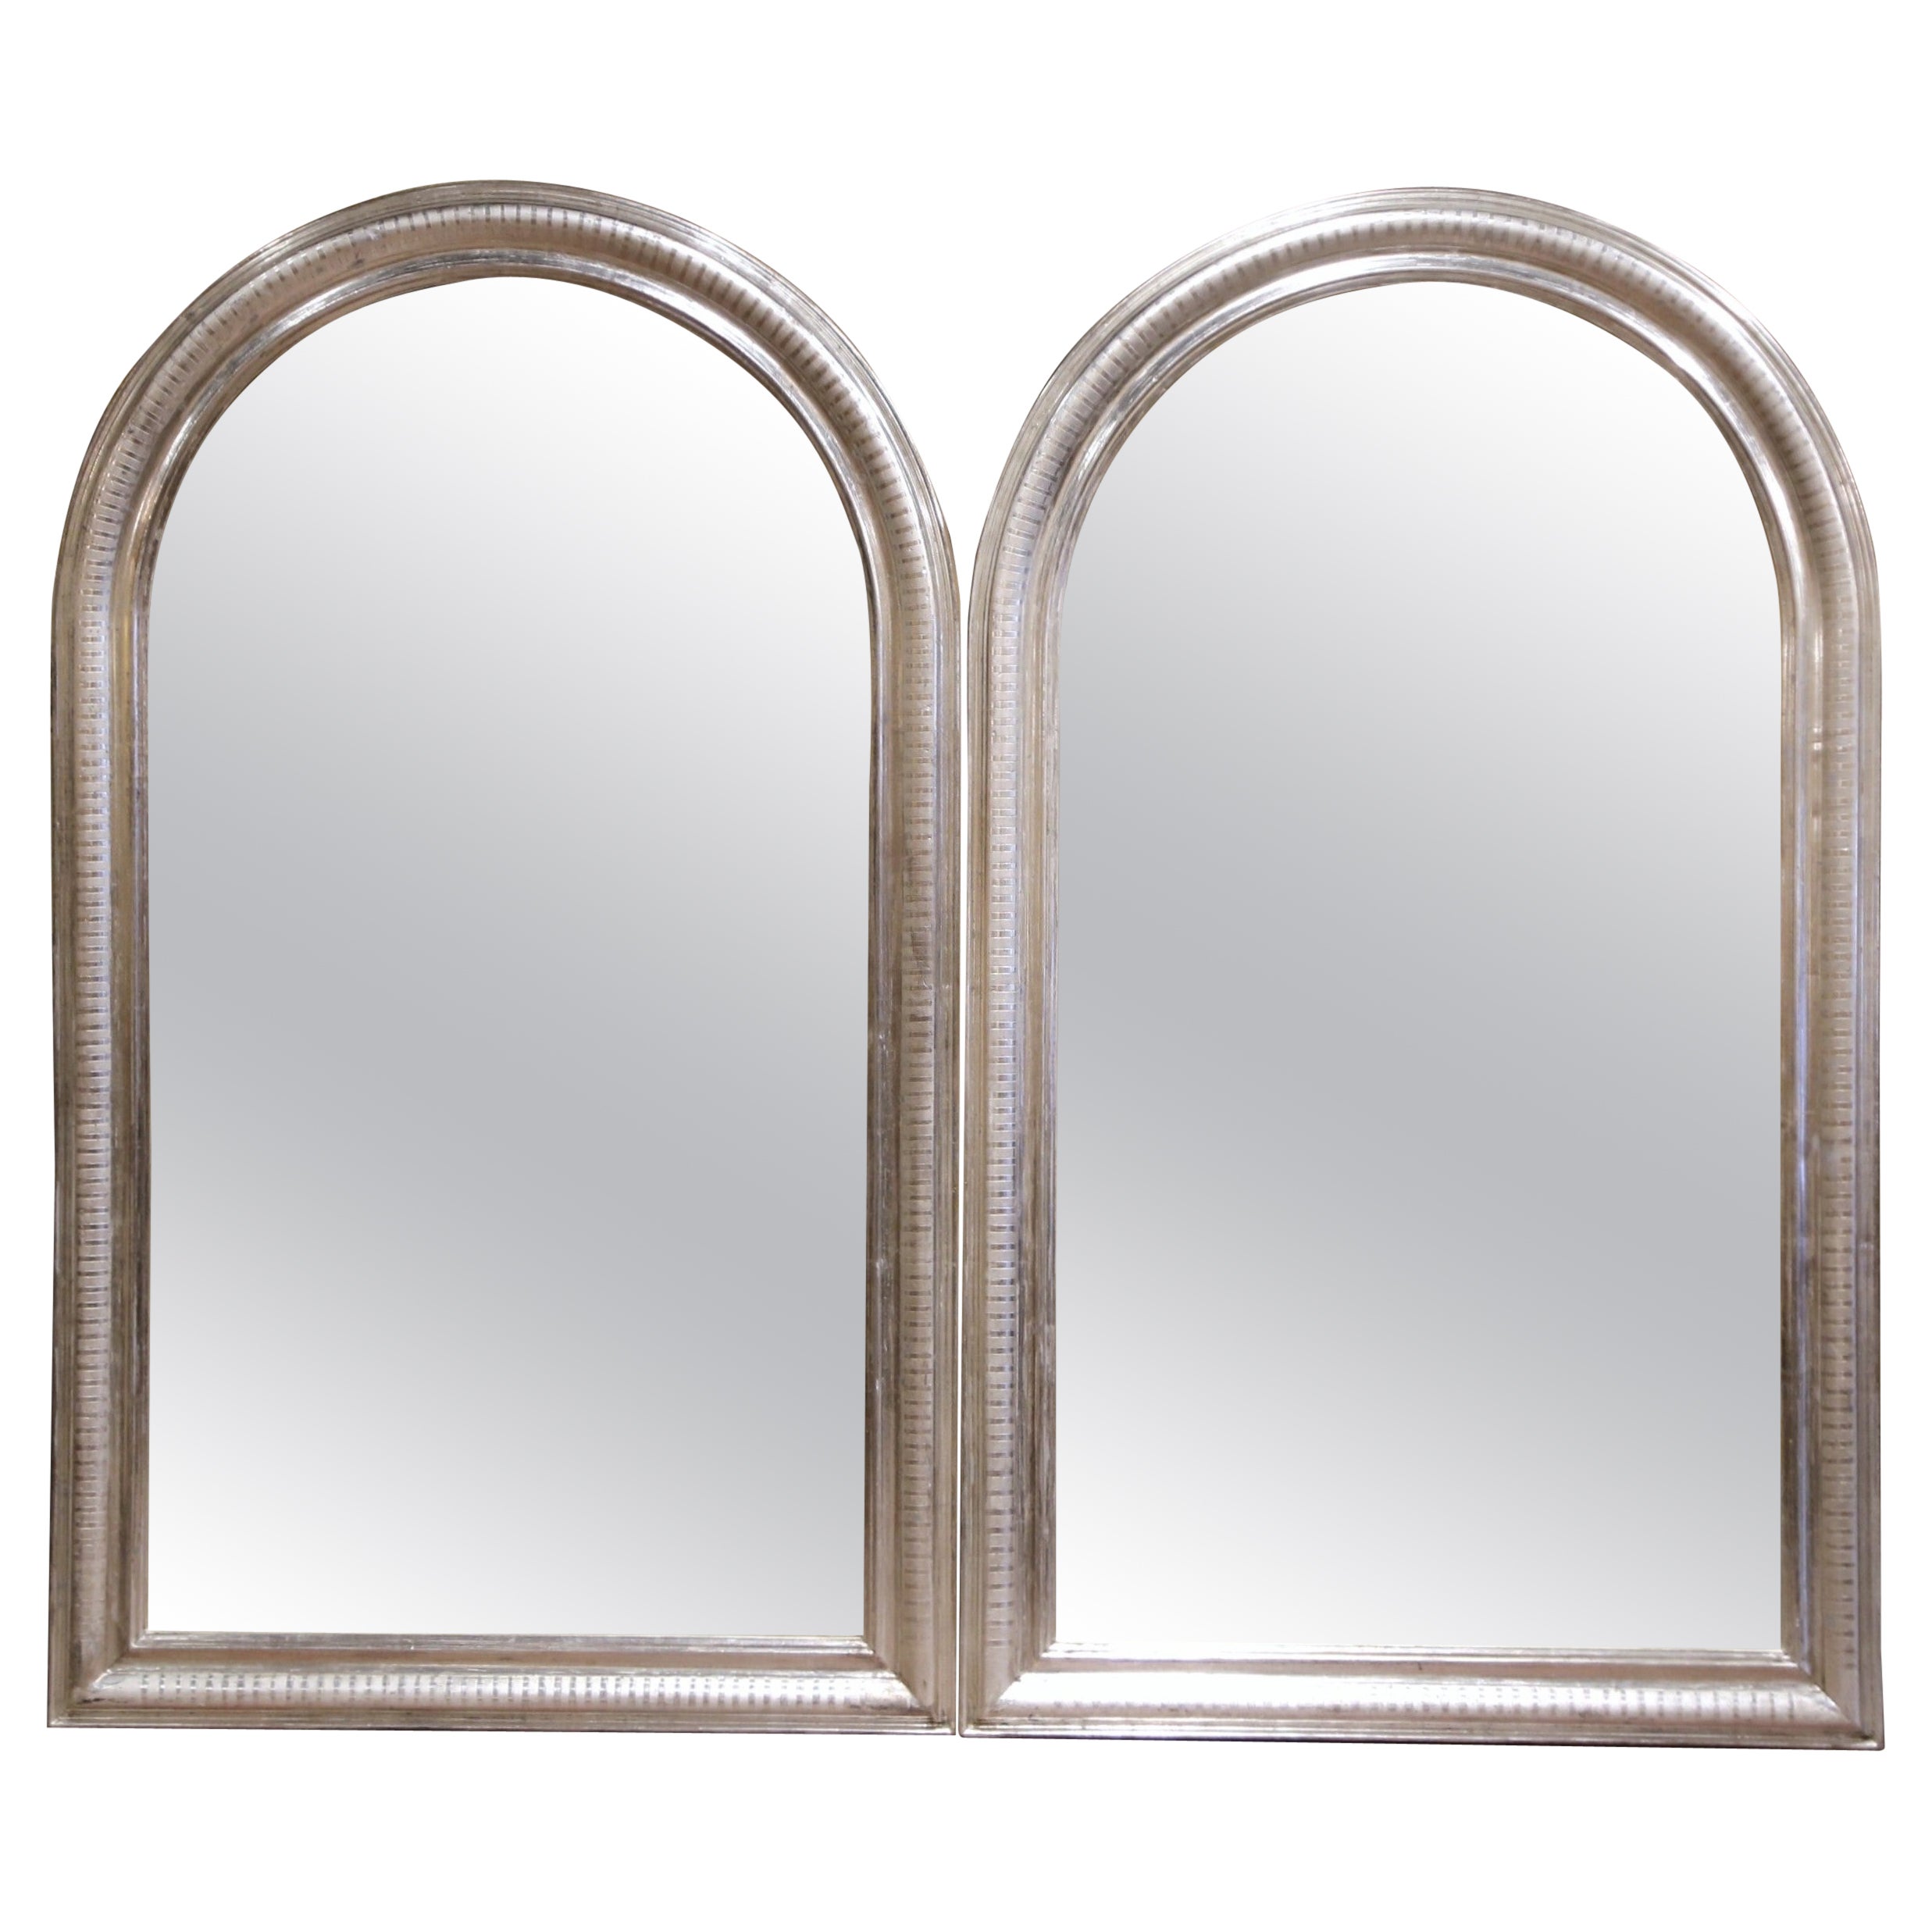  Pair of Vintage French Louis Philippe Silver Leaf Mirrors with Engraved Motifs For Sale